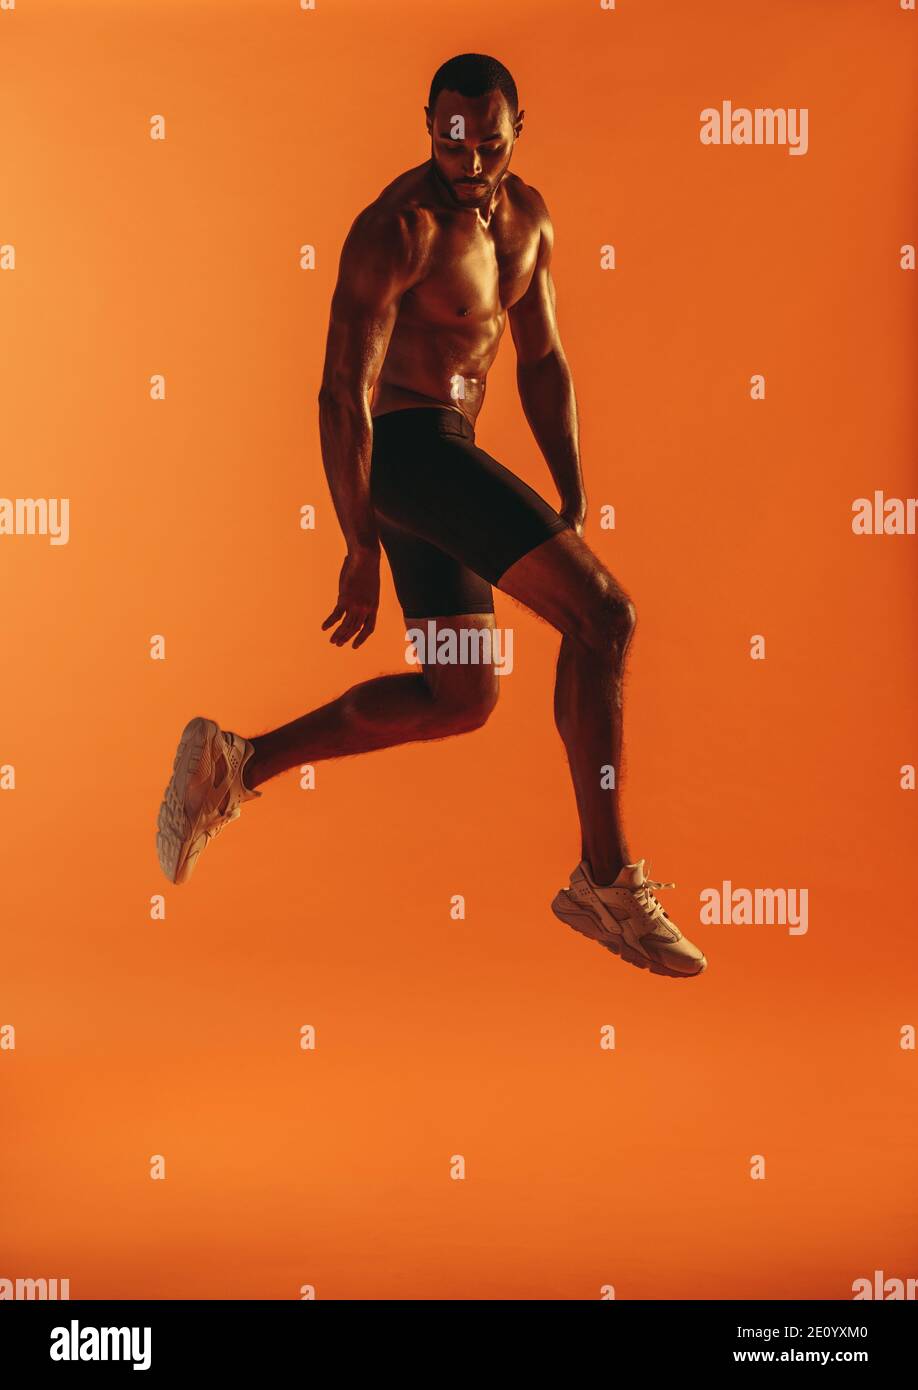 Athletic man jumping in air while working out on orange background. Monochrome fitness portrait of muscular athlete doing workout. Stock Photo